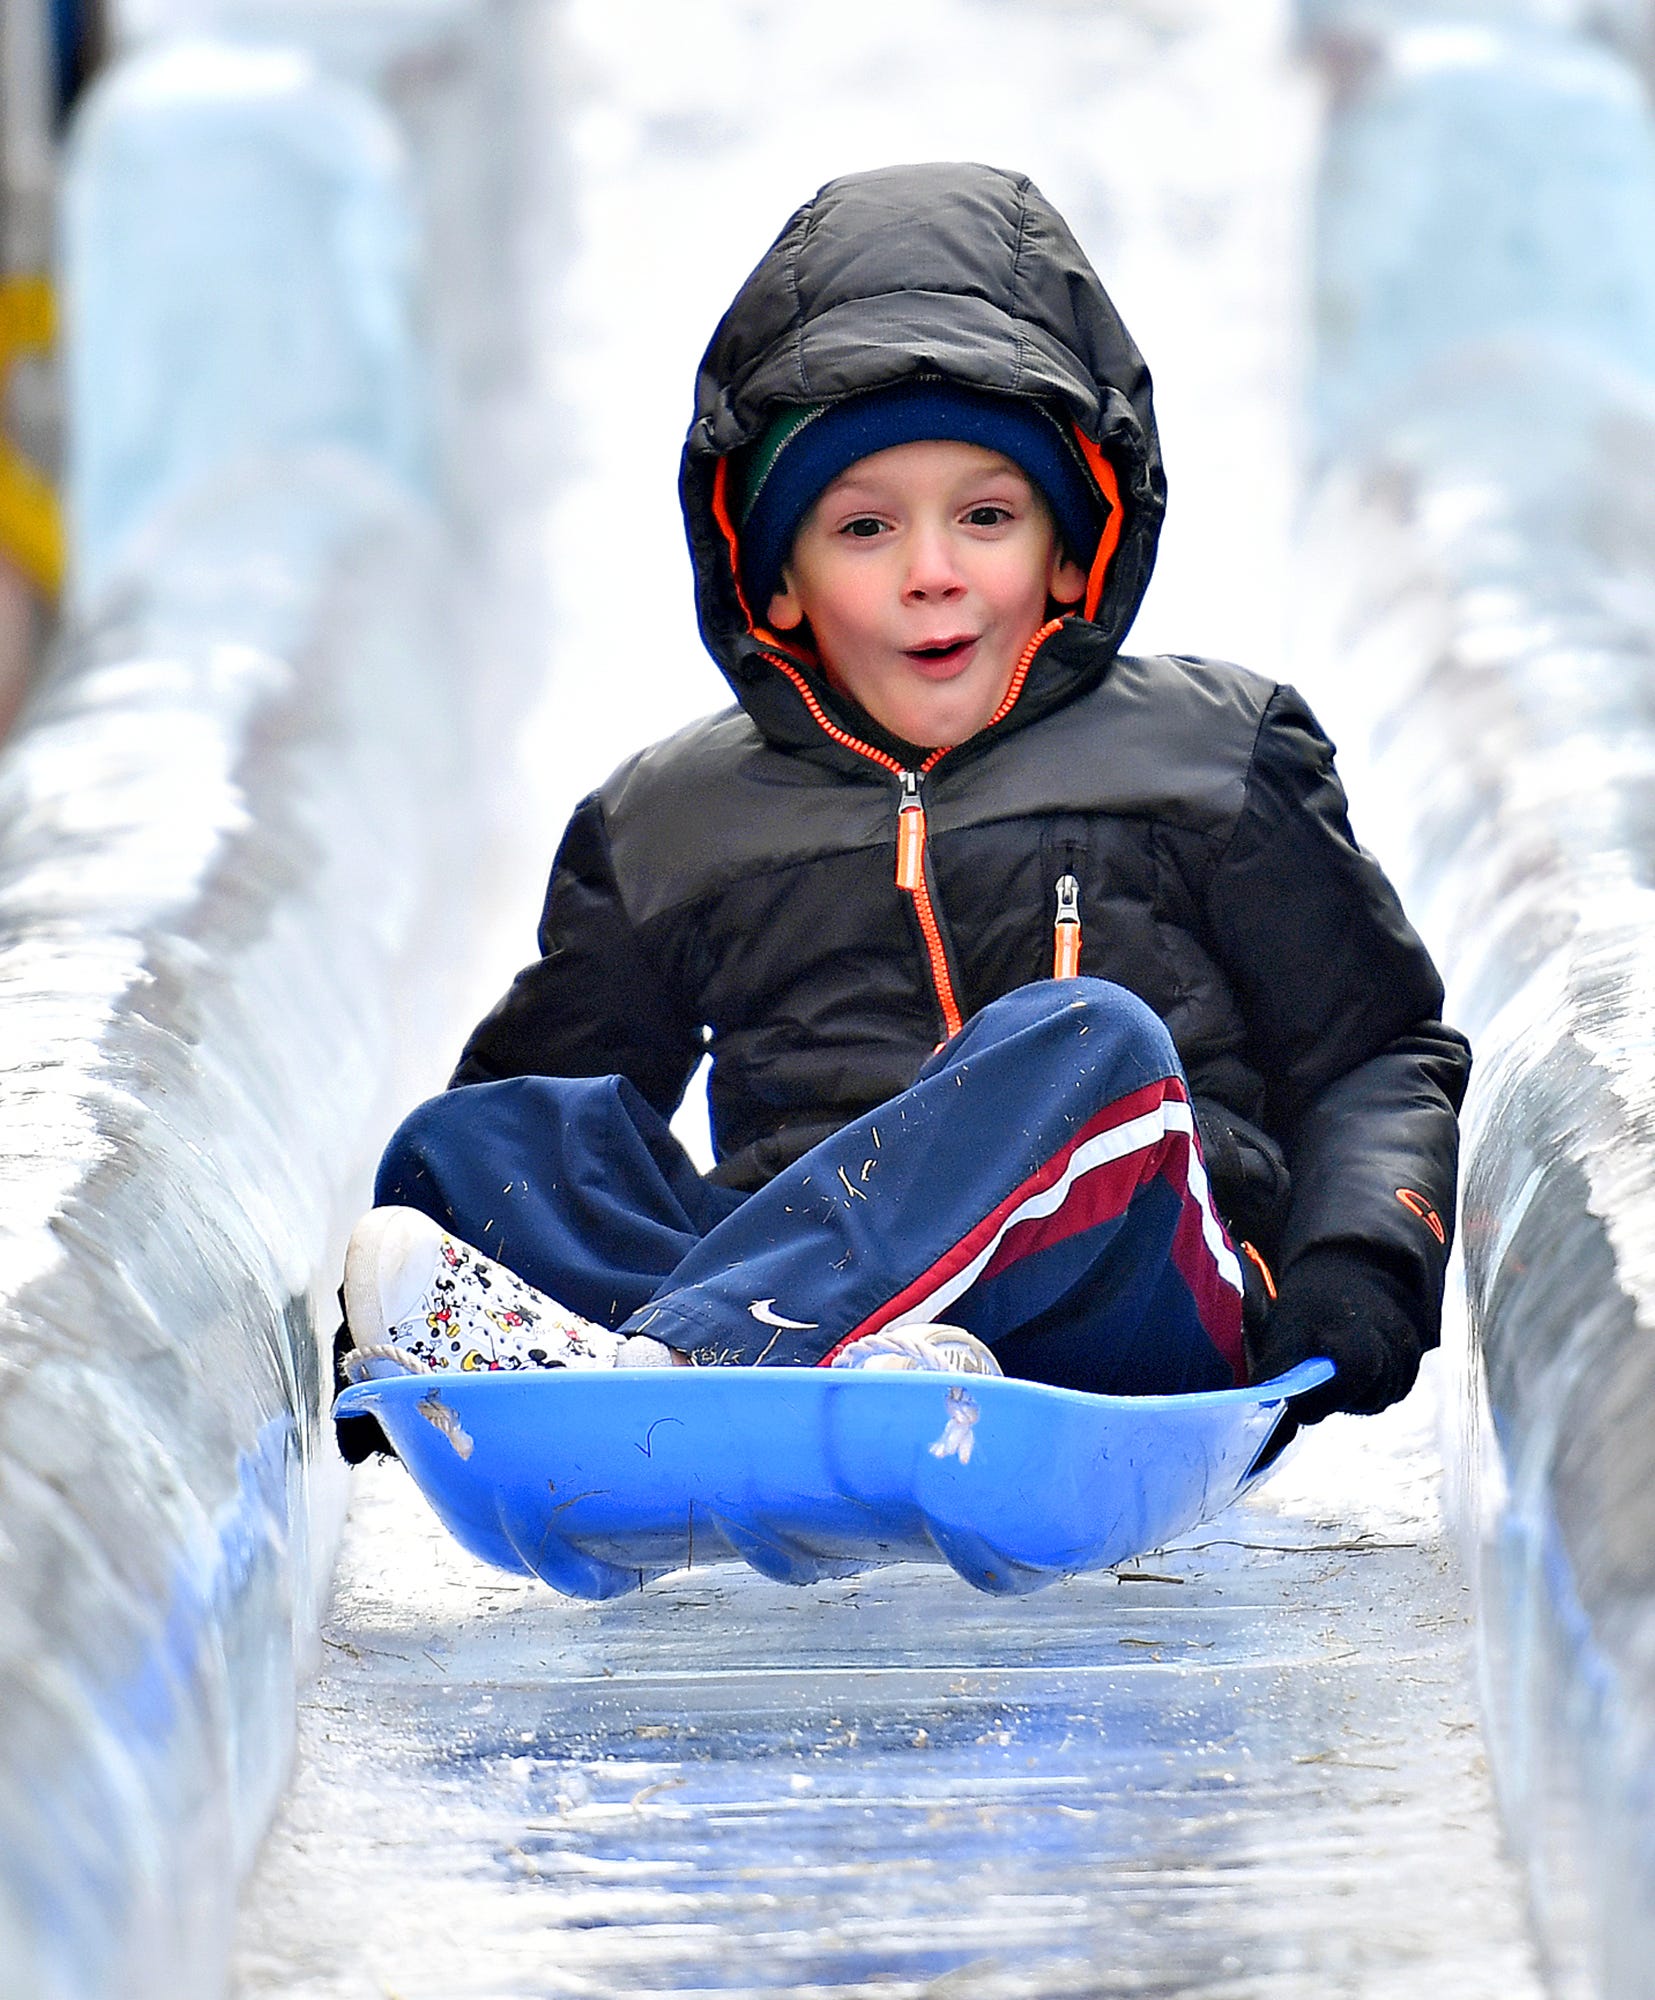 Mason Grunden, 5, of Manchester Township, slides down the 40-foot WellSpan Ice Slide during the 8th annual FestivICE event in downtown York City, Saturday, Jan. 15, 2022. Dawn J. Sagert photo